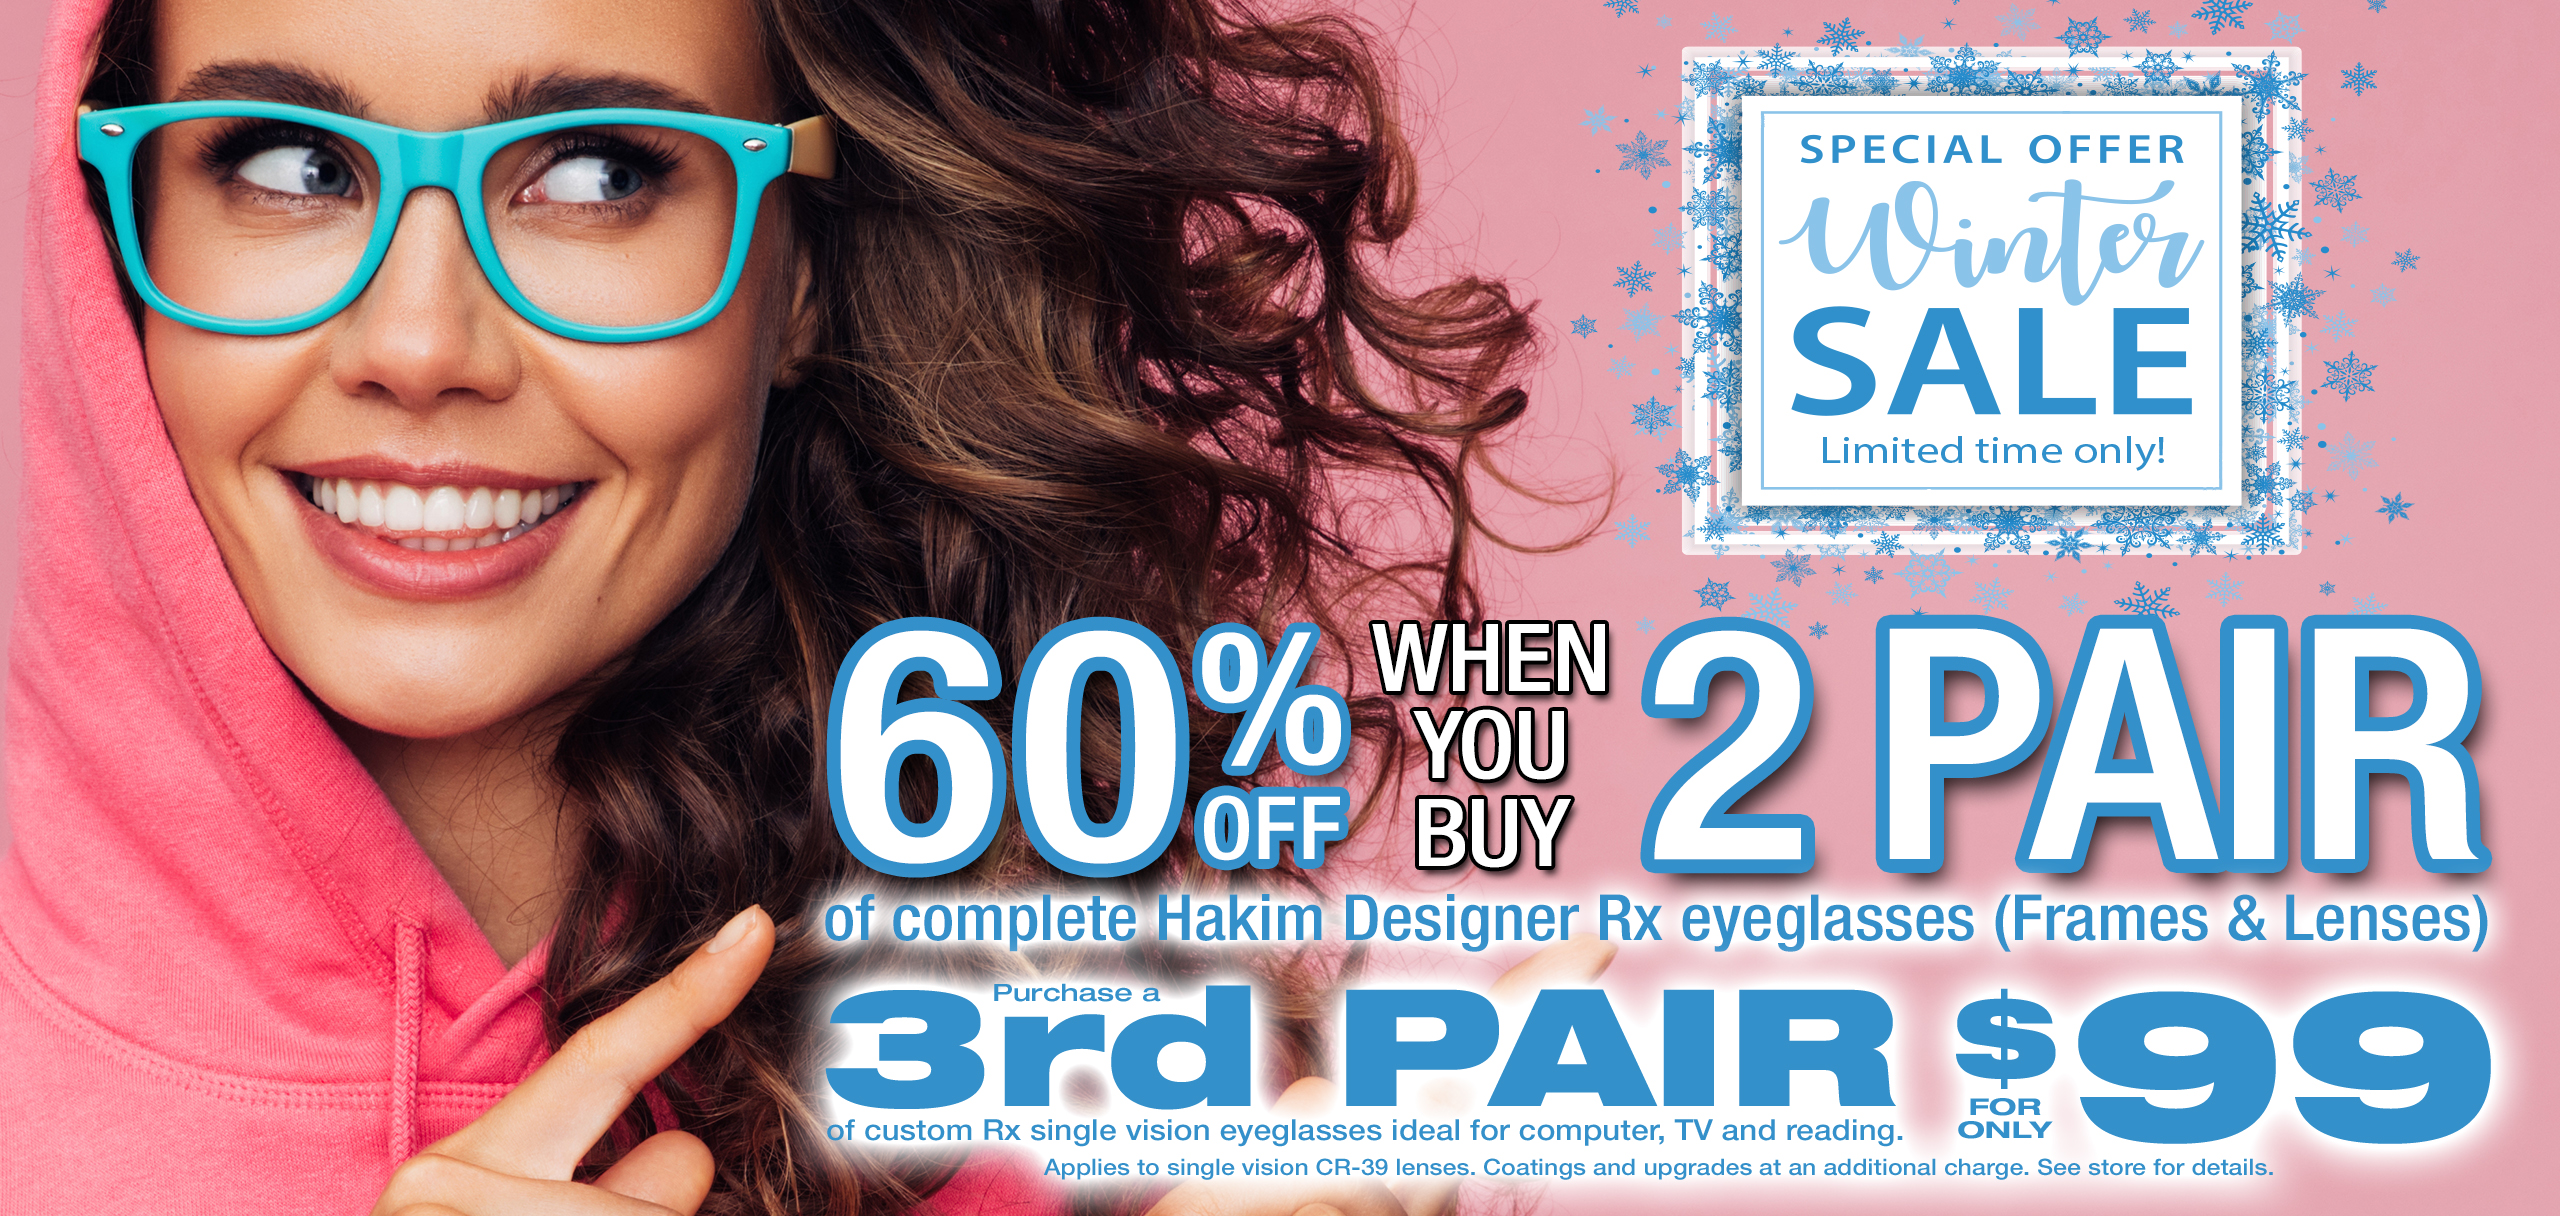 Hakim Optical's Big Winter Sale - Save 60% when you buy 2-pair and purchase the 3rd pair from only $99